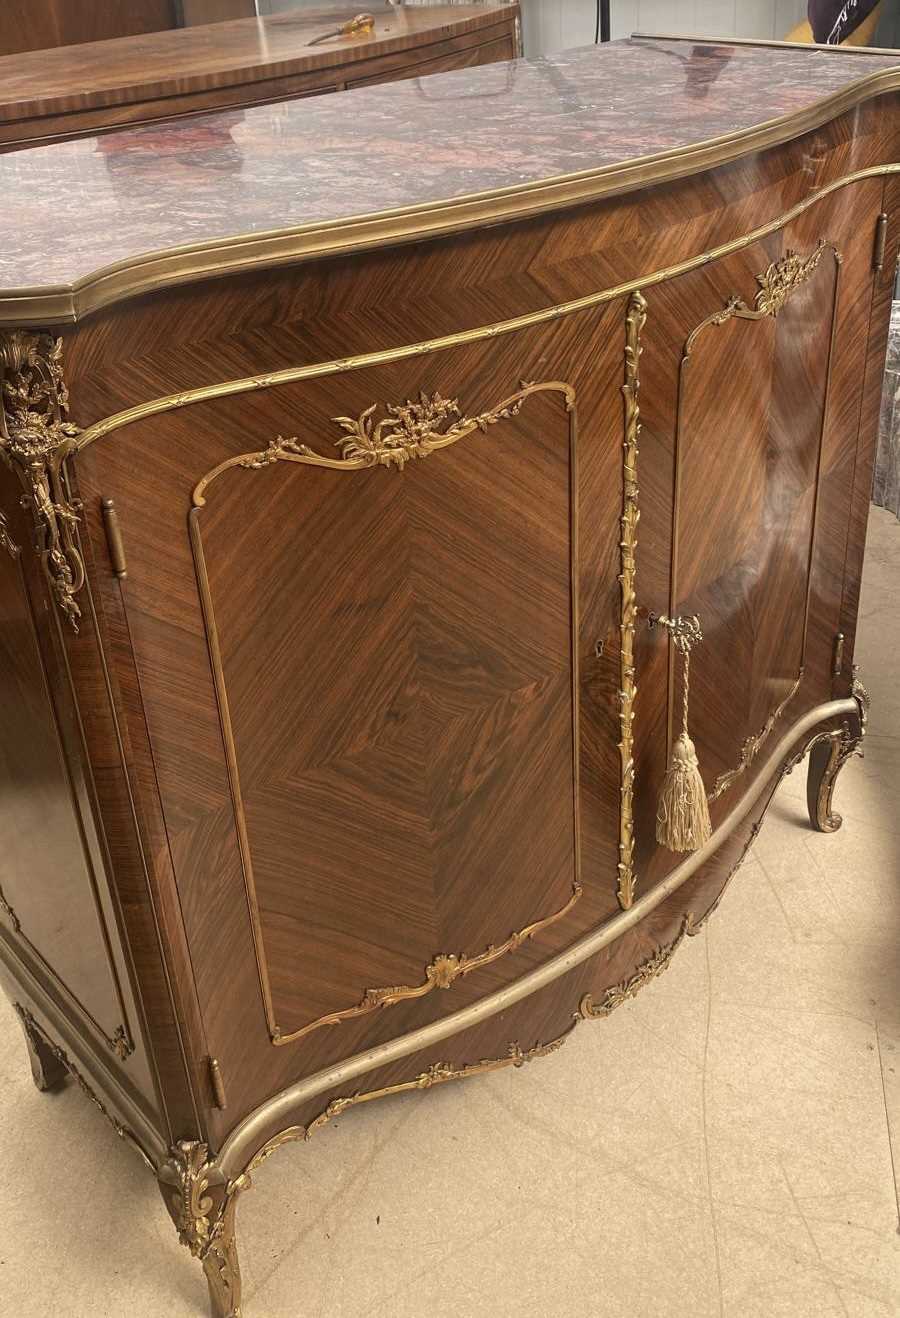 A LATE 19TH CENTURY FRENCH KINGWOOD AND OMROLU MOUNTED CABINET - Image 4 of 11